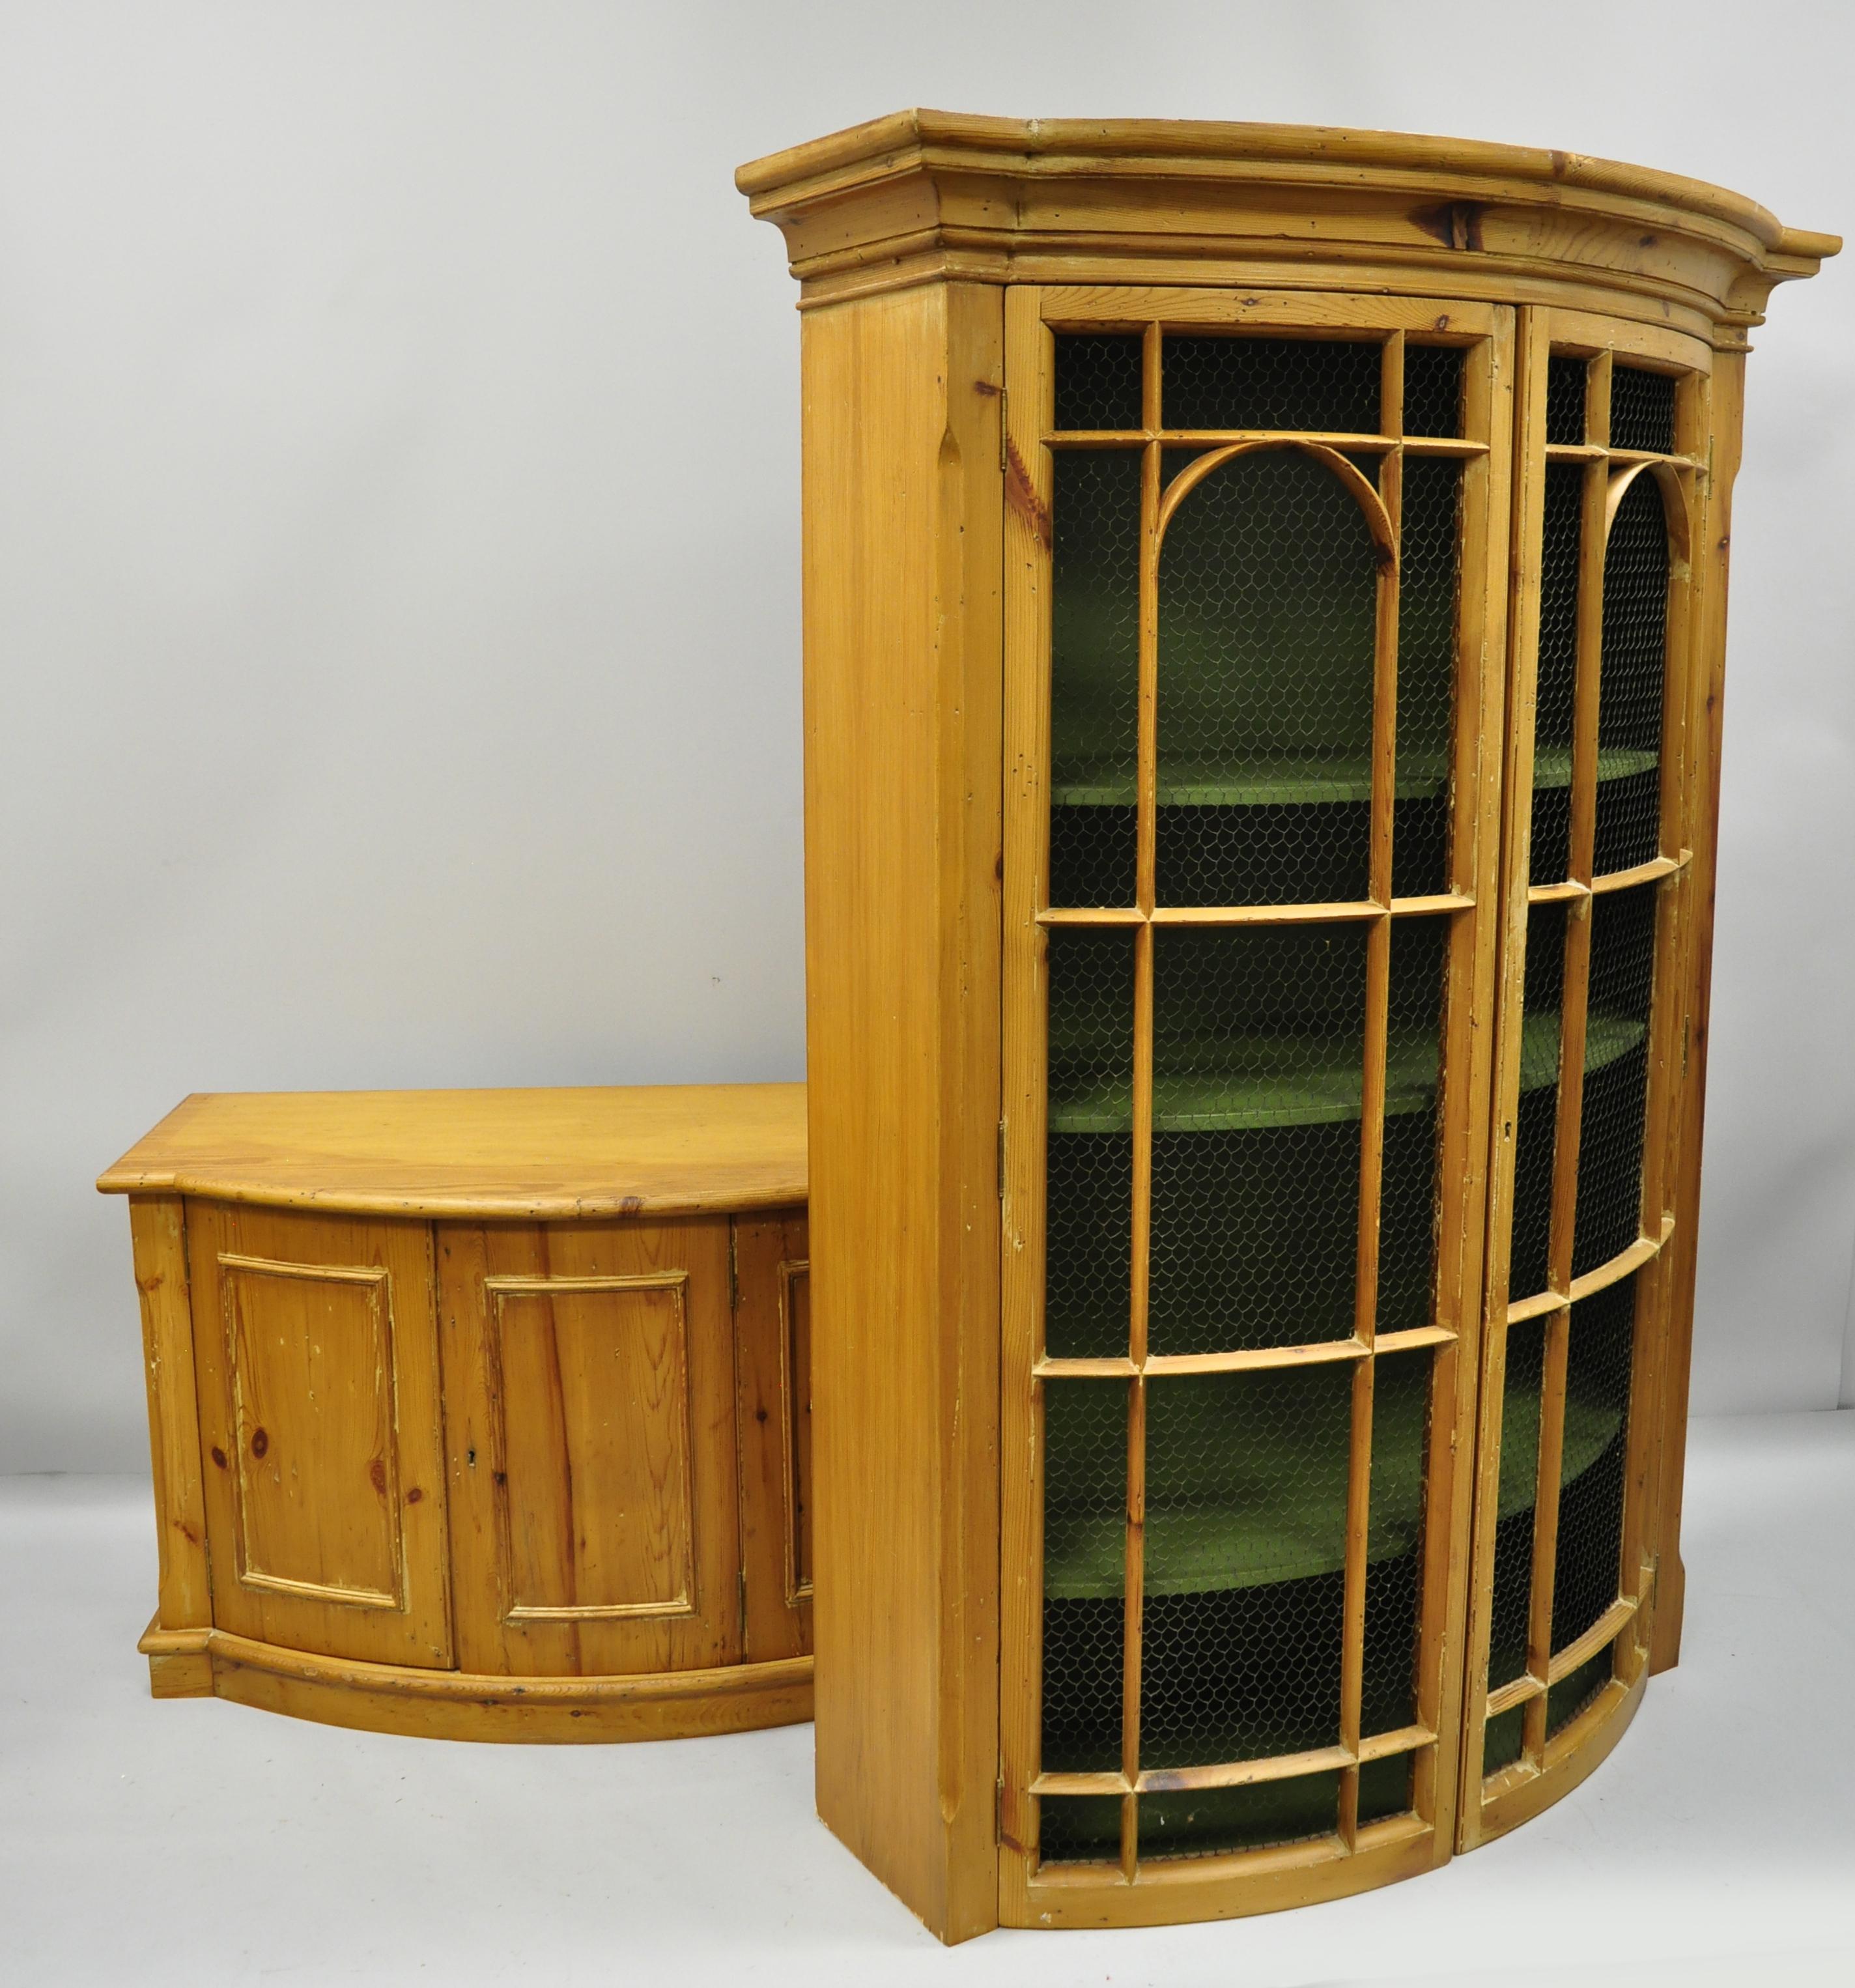 Tall Spanish bookcase cabinet. Item features green painted interior, two swing doors with metal wire lattice, and lower swing cabinet doors, circa mid-20th century. Measurements: 87